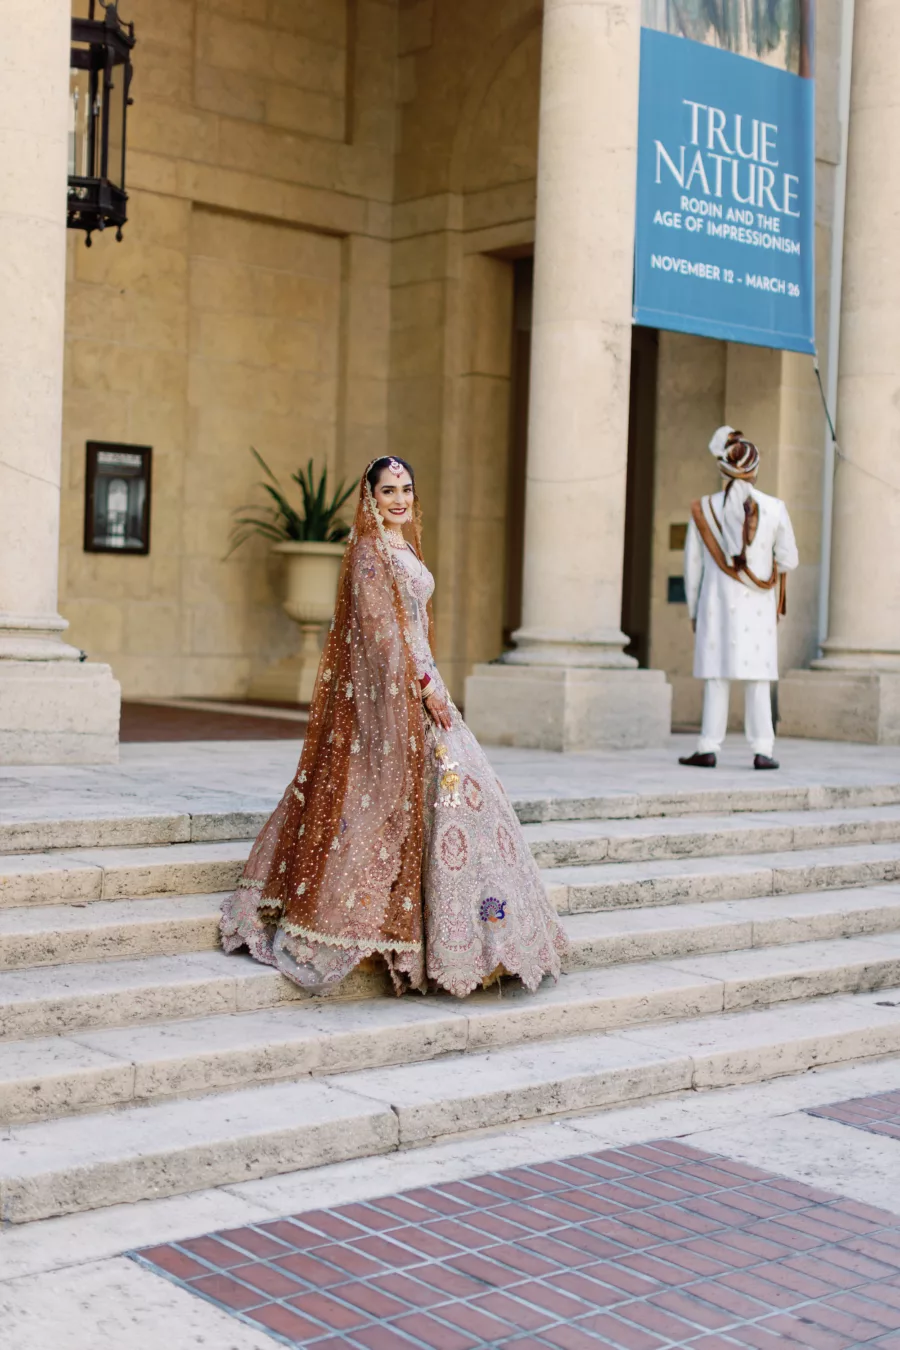 Bride and Groom First Look Wedding Portrait | Neutral Burnt Orange and Cream Beaded Rimple and Harpreet Lehenga Indian Wedding Bridal Attire Inspiration | Tampa Bay Hair and Makeup Artist Michele Renee The Studio